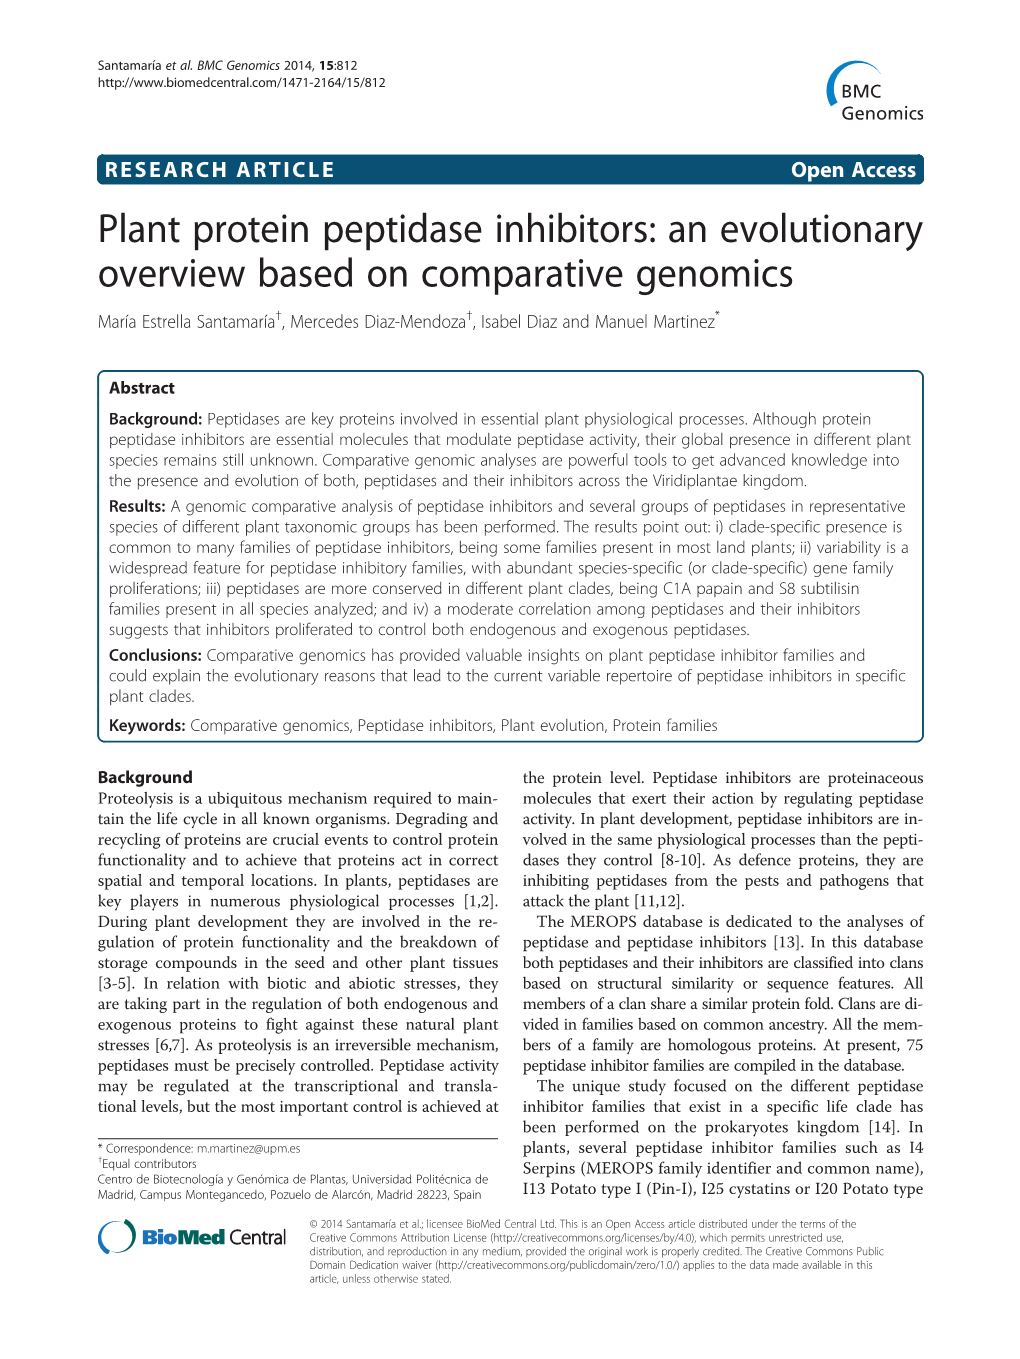 Plant Protein Peptidase Inhibitors: an Evolutionary Overview Based On